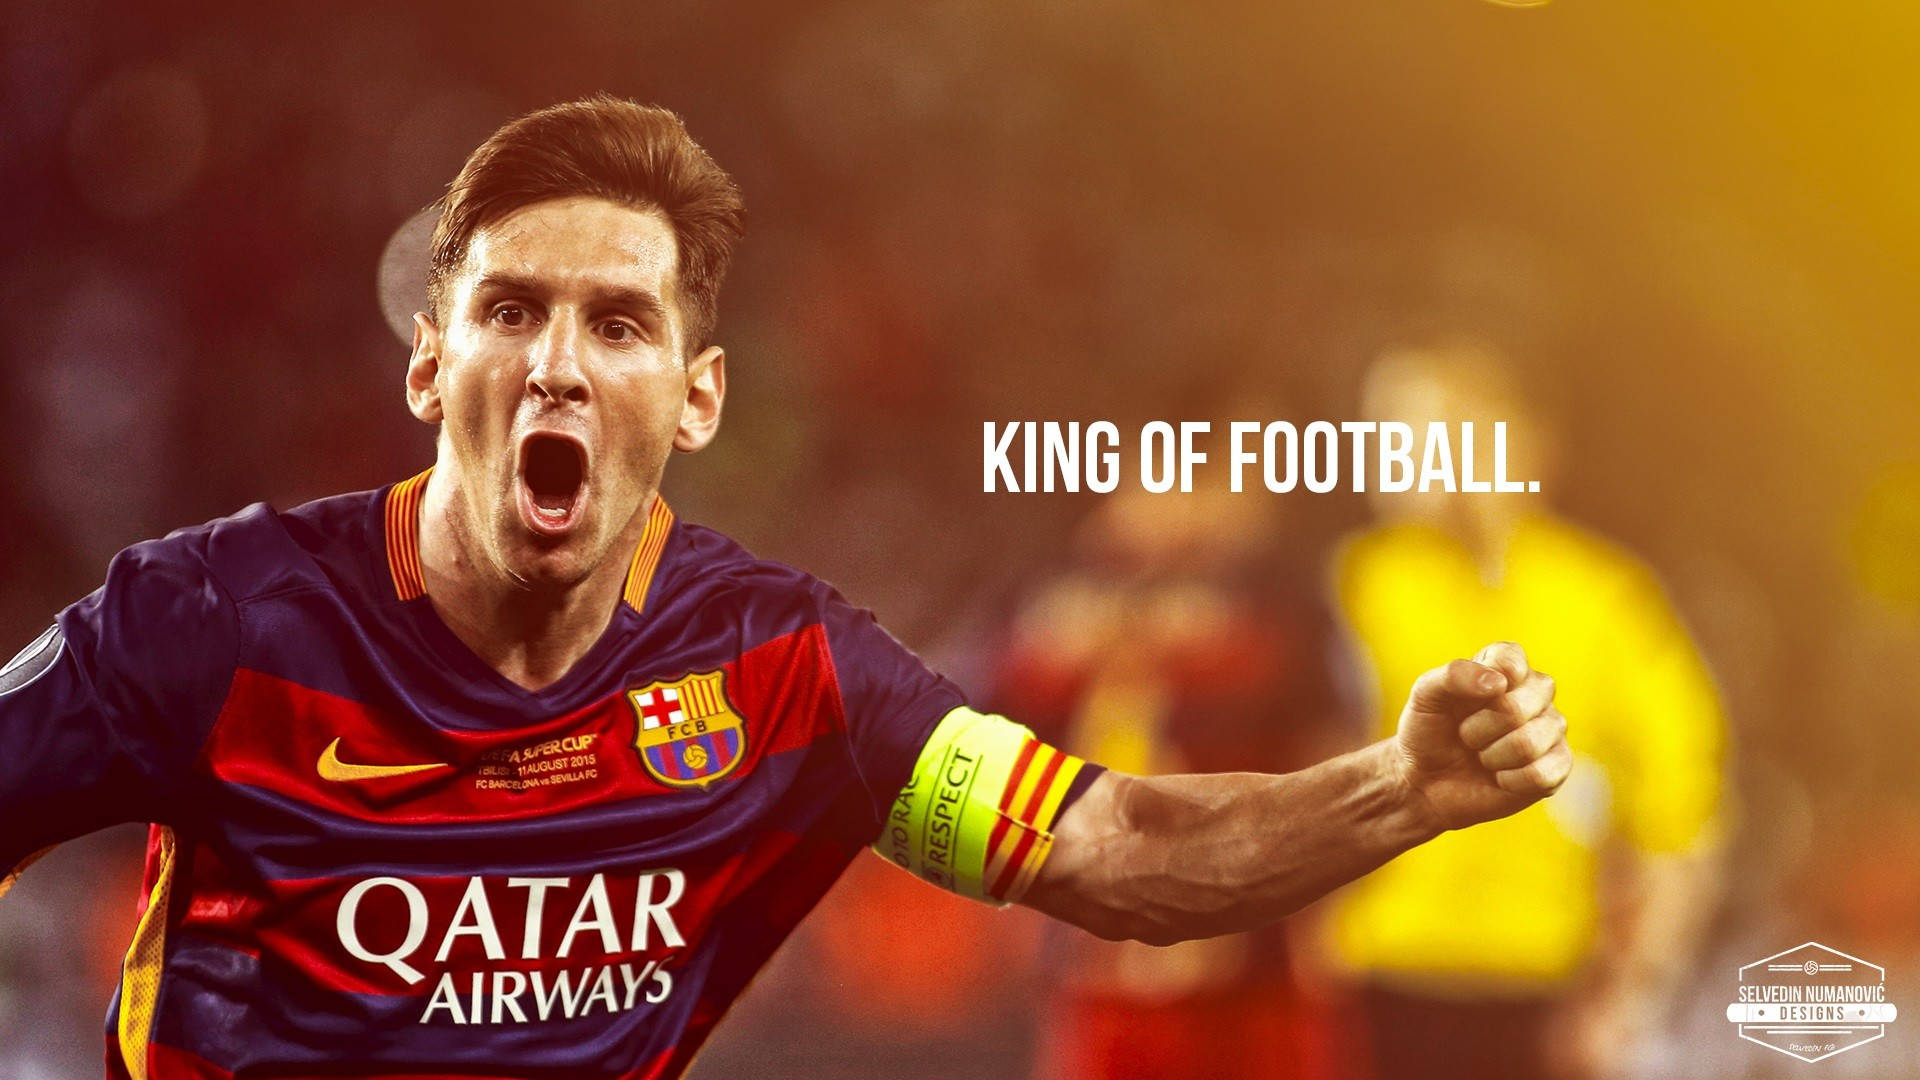 Lionel Messi In Action At Psg Wallpaper